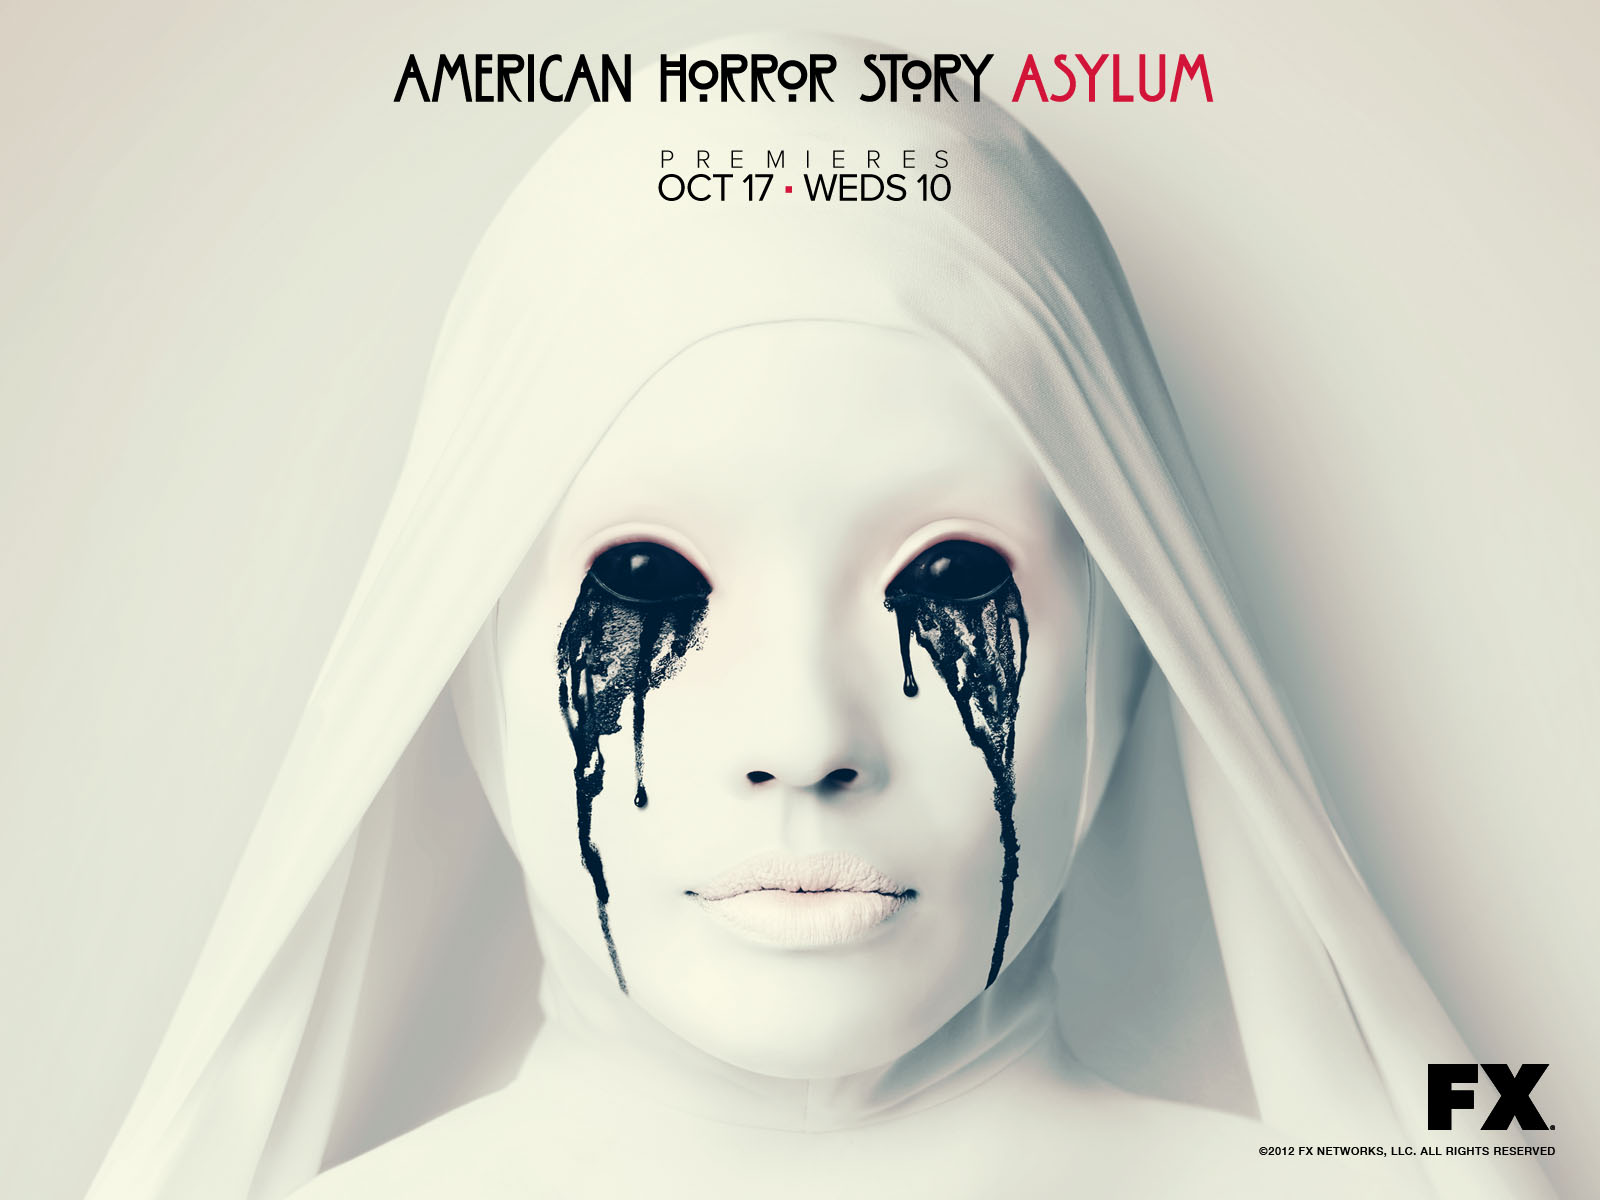 American Horror Story at SDCC 2013